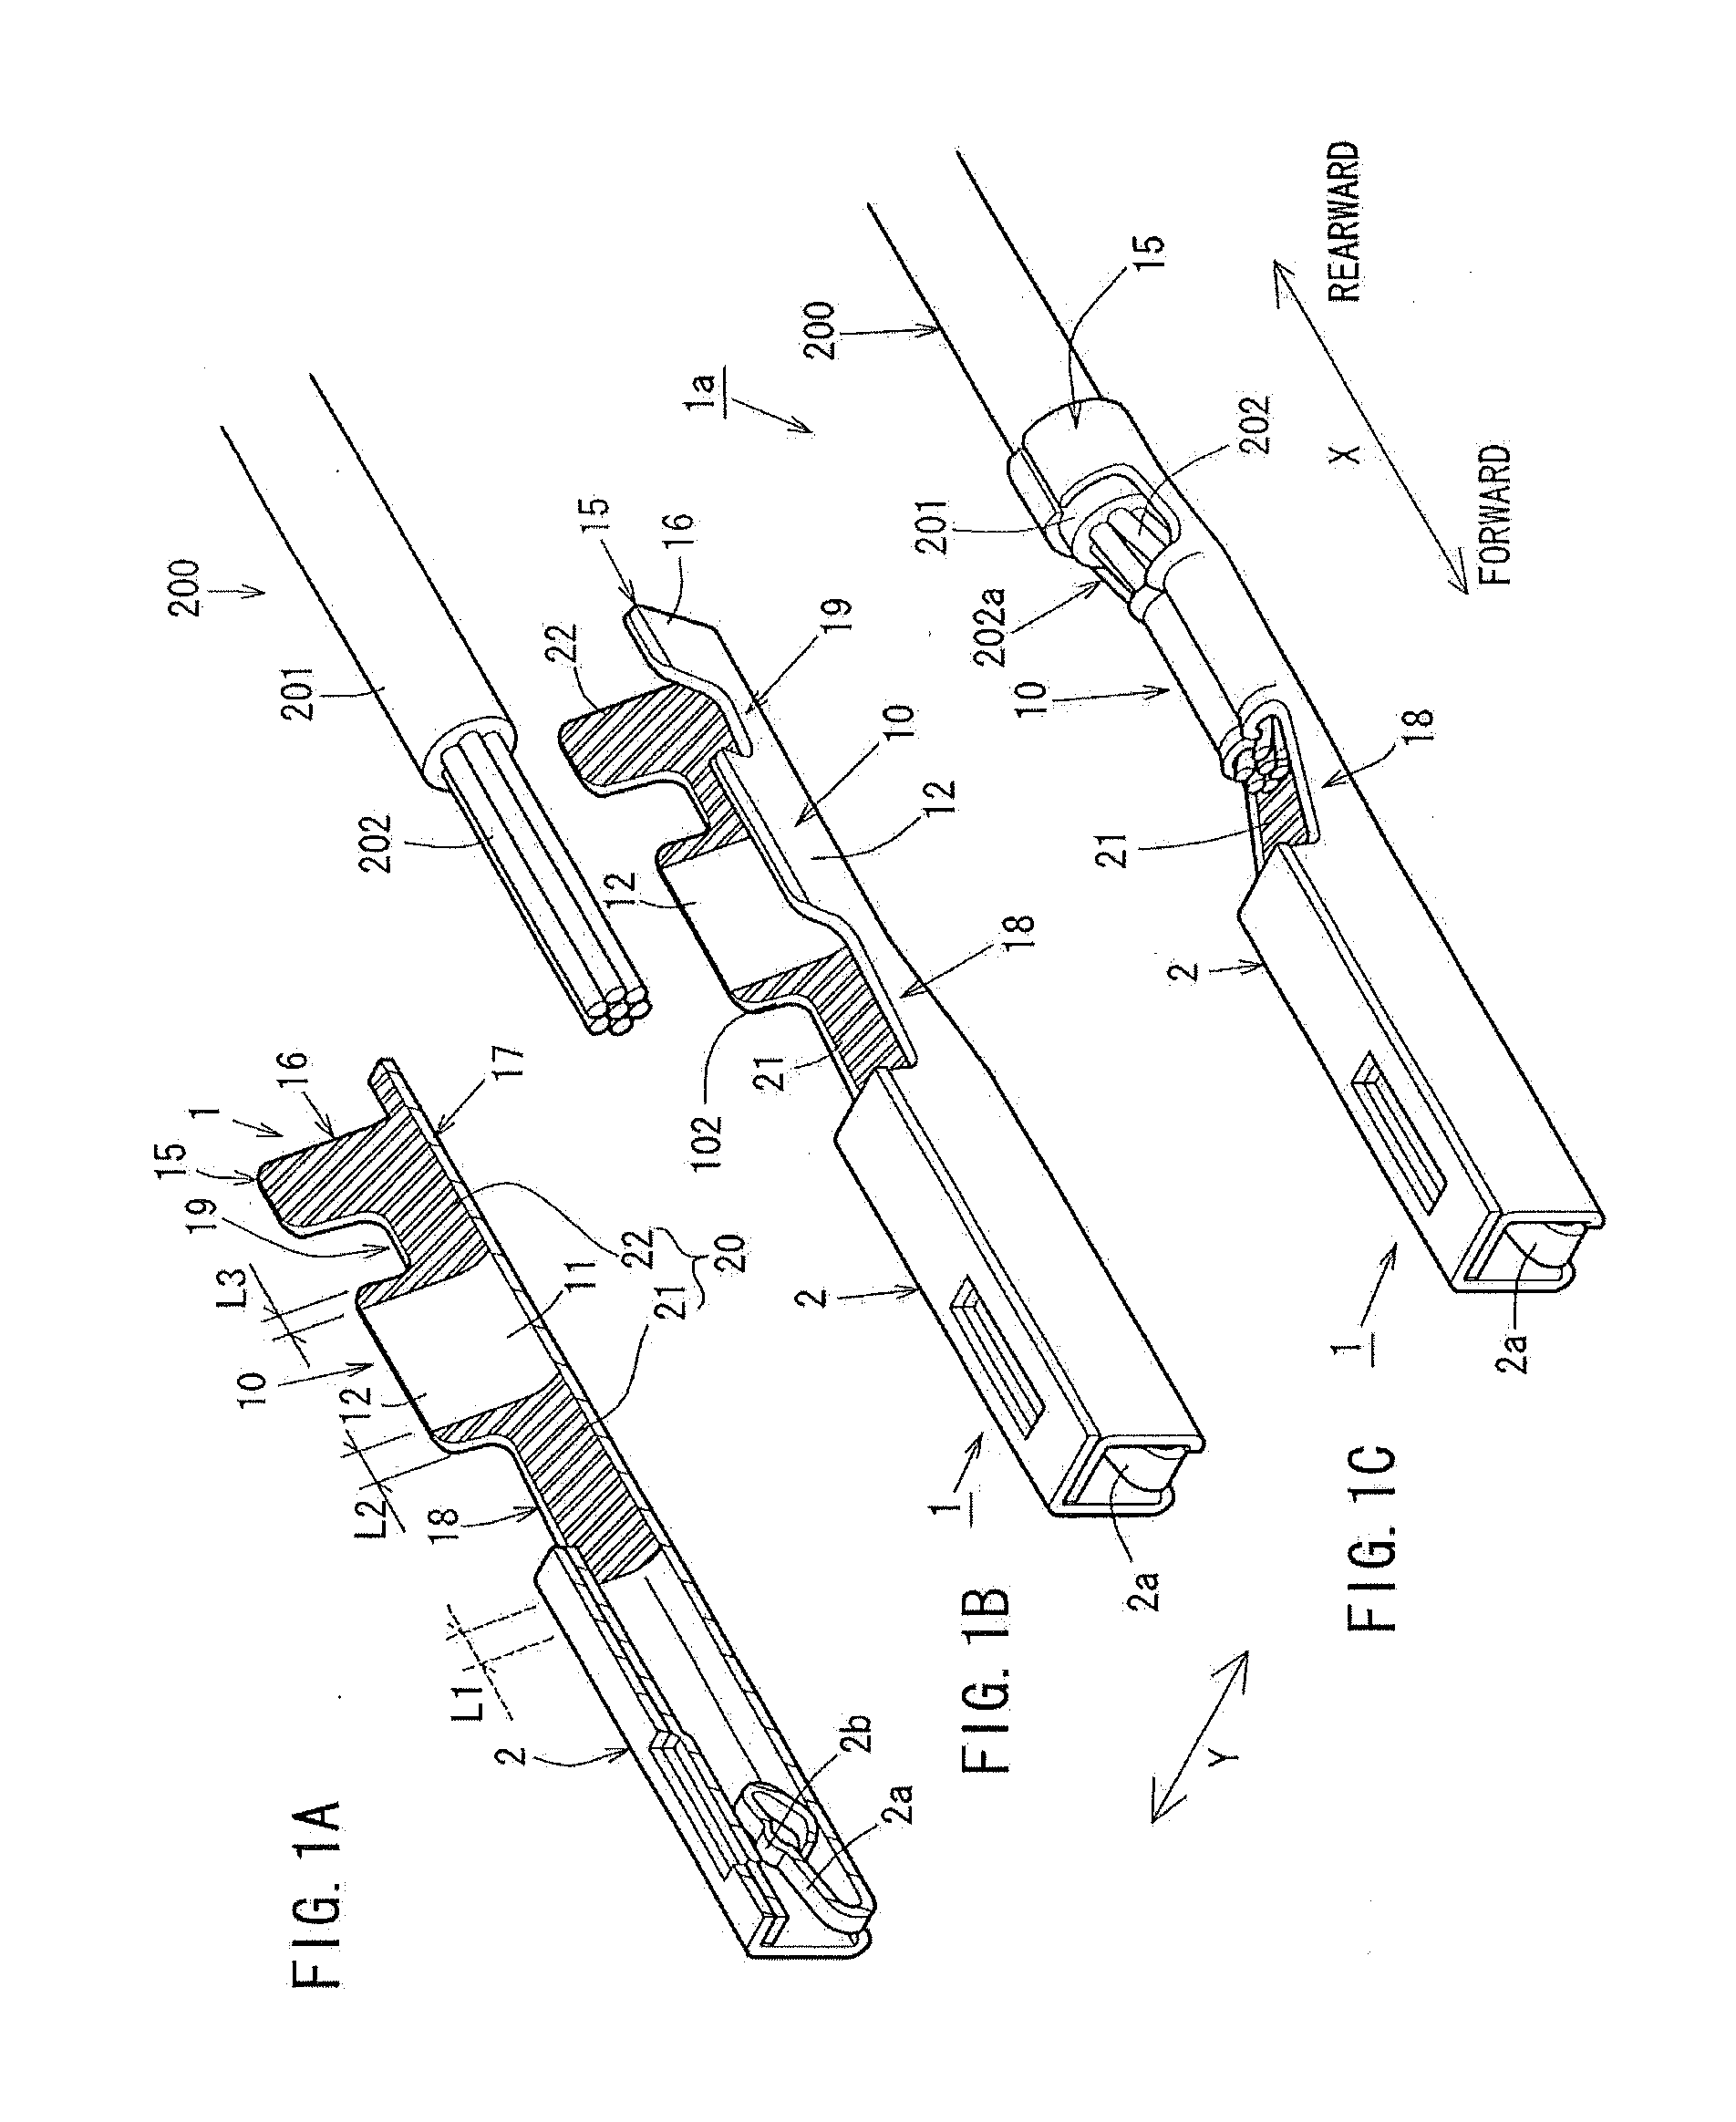 Crimp terminal, connection structural body and method for producing the crimp terminal